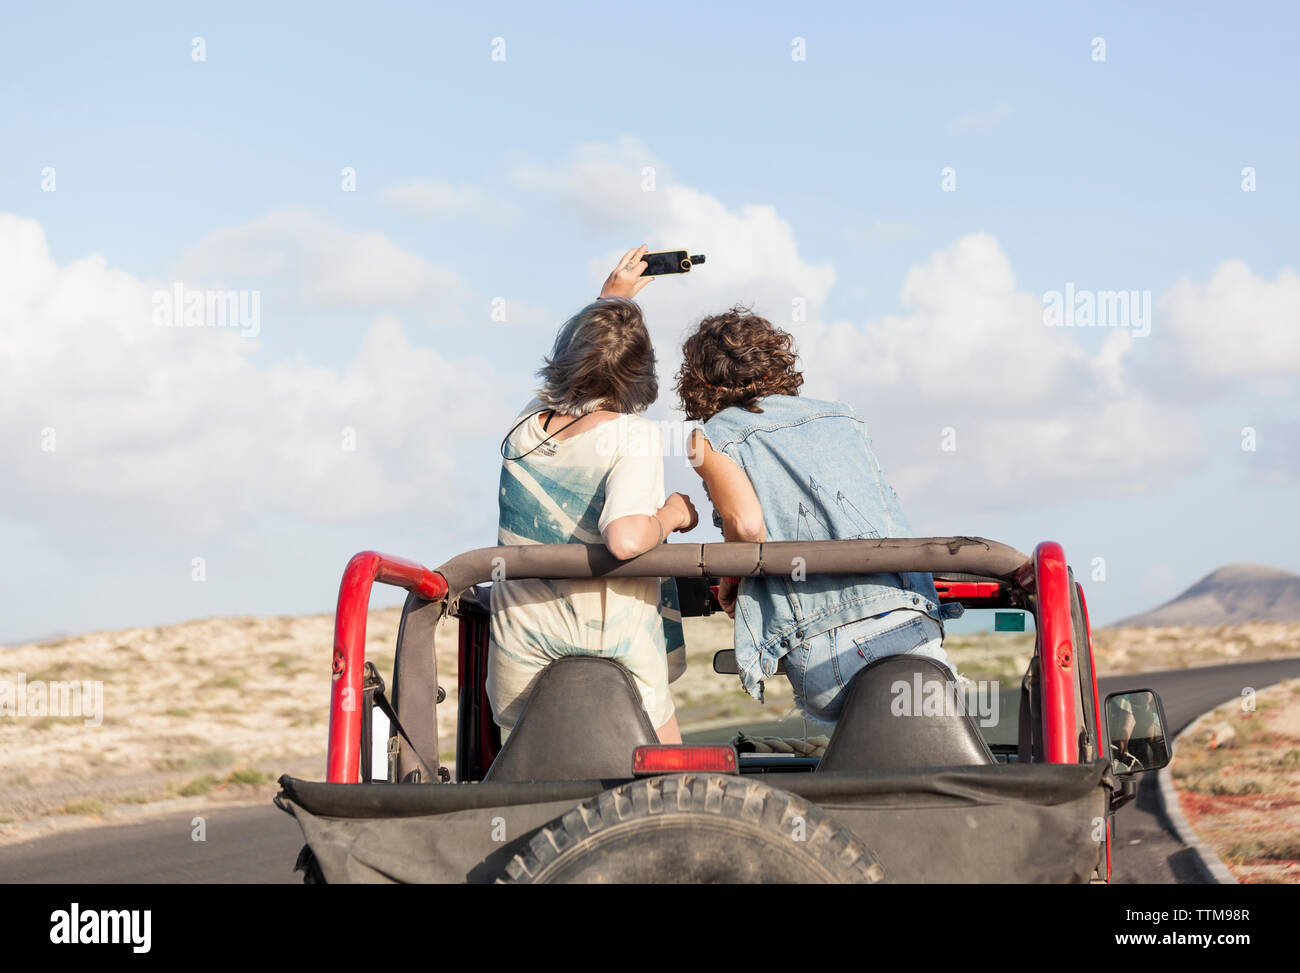 Two surfer girls  on a 4x4 jeep taking selfie Stock Photo